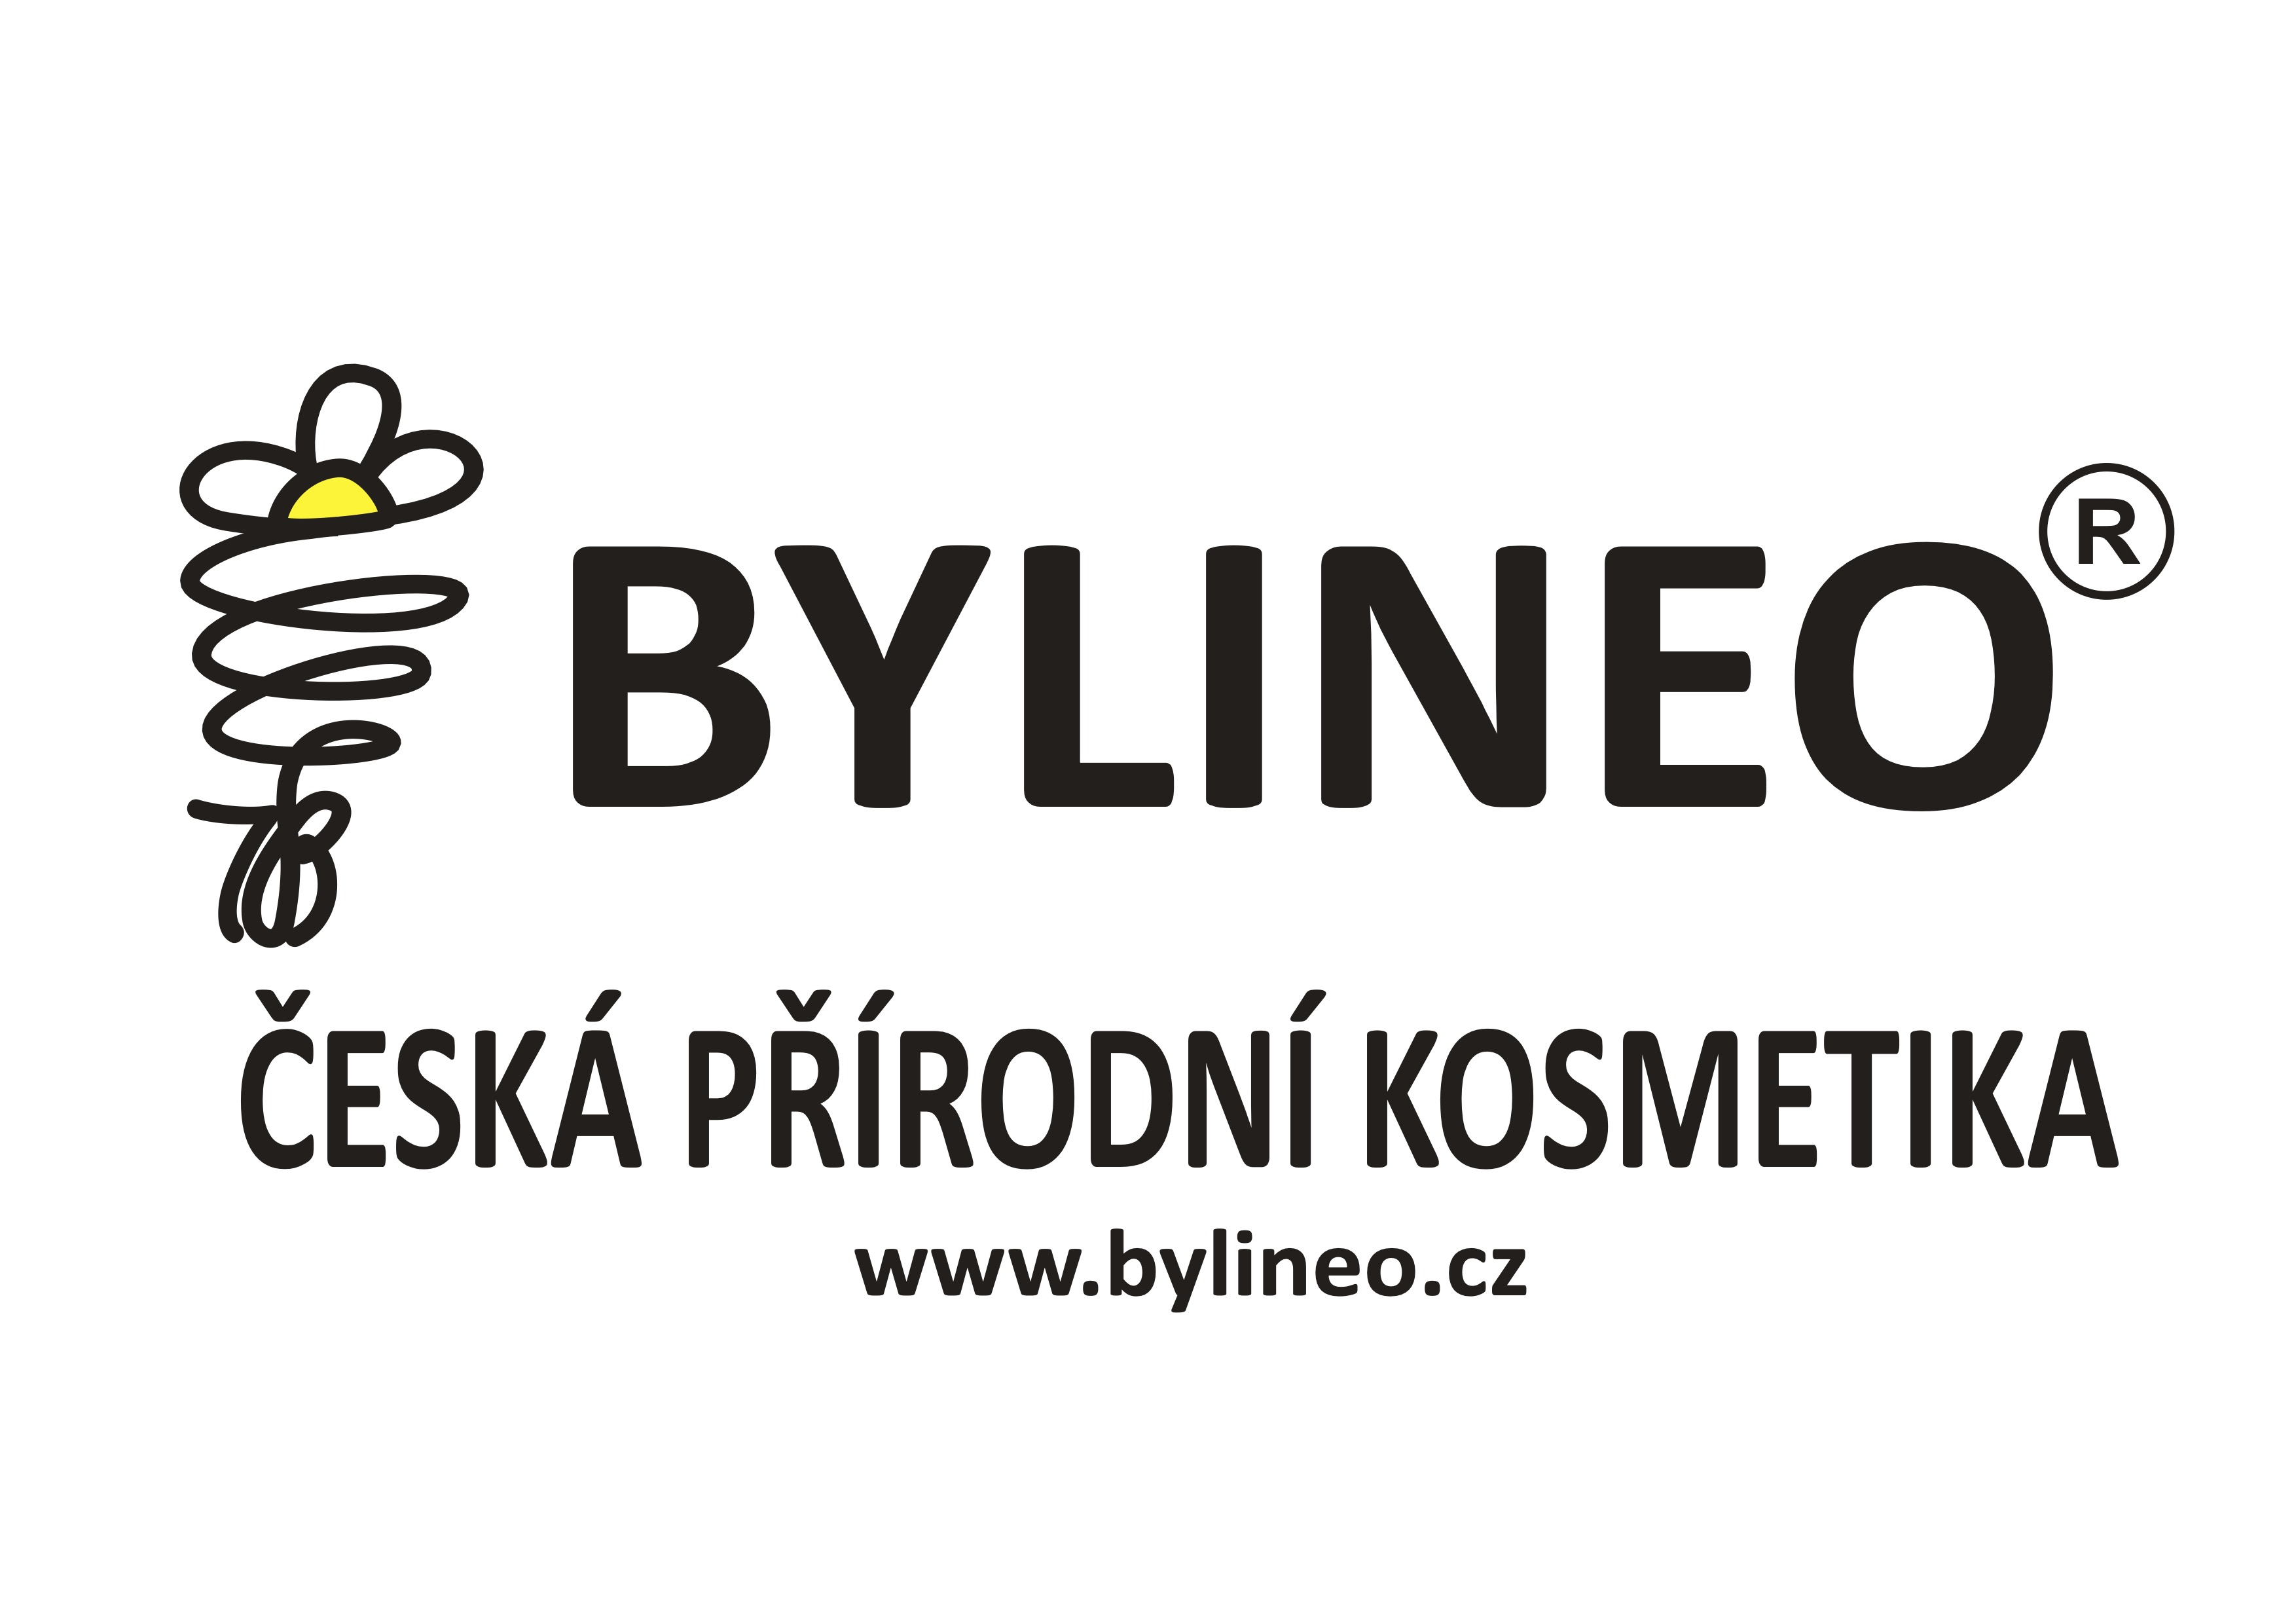 Bylineo